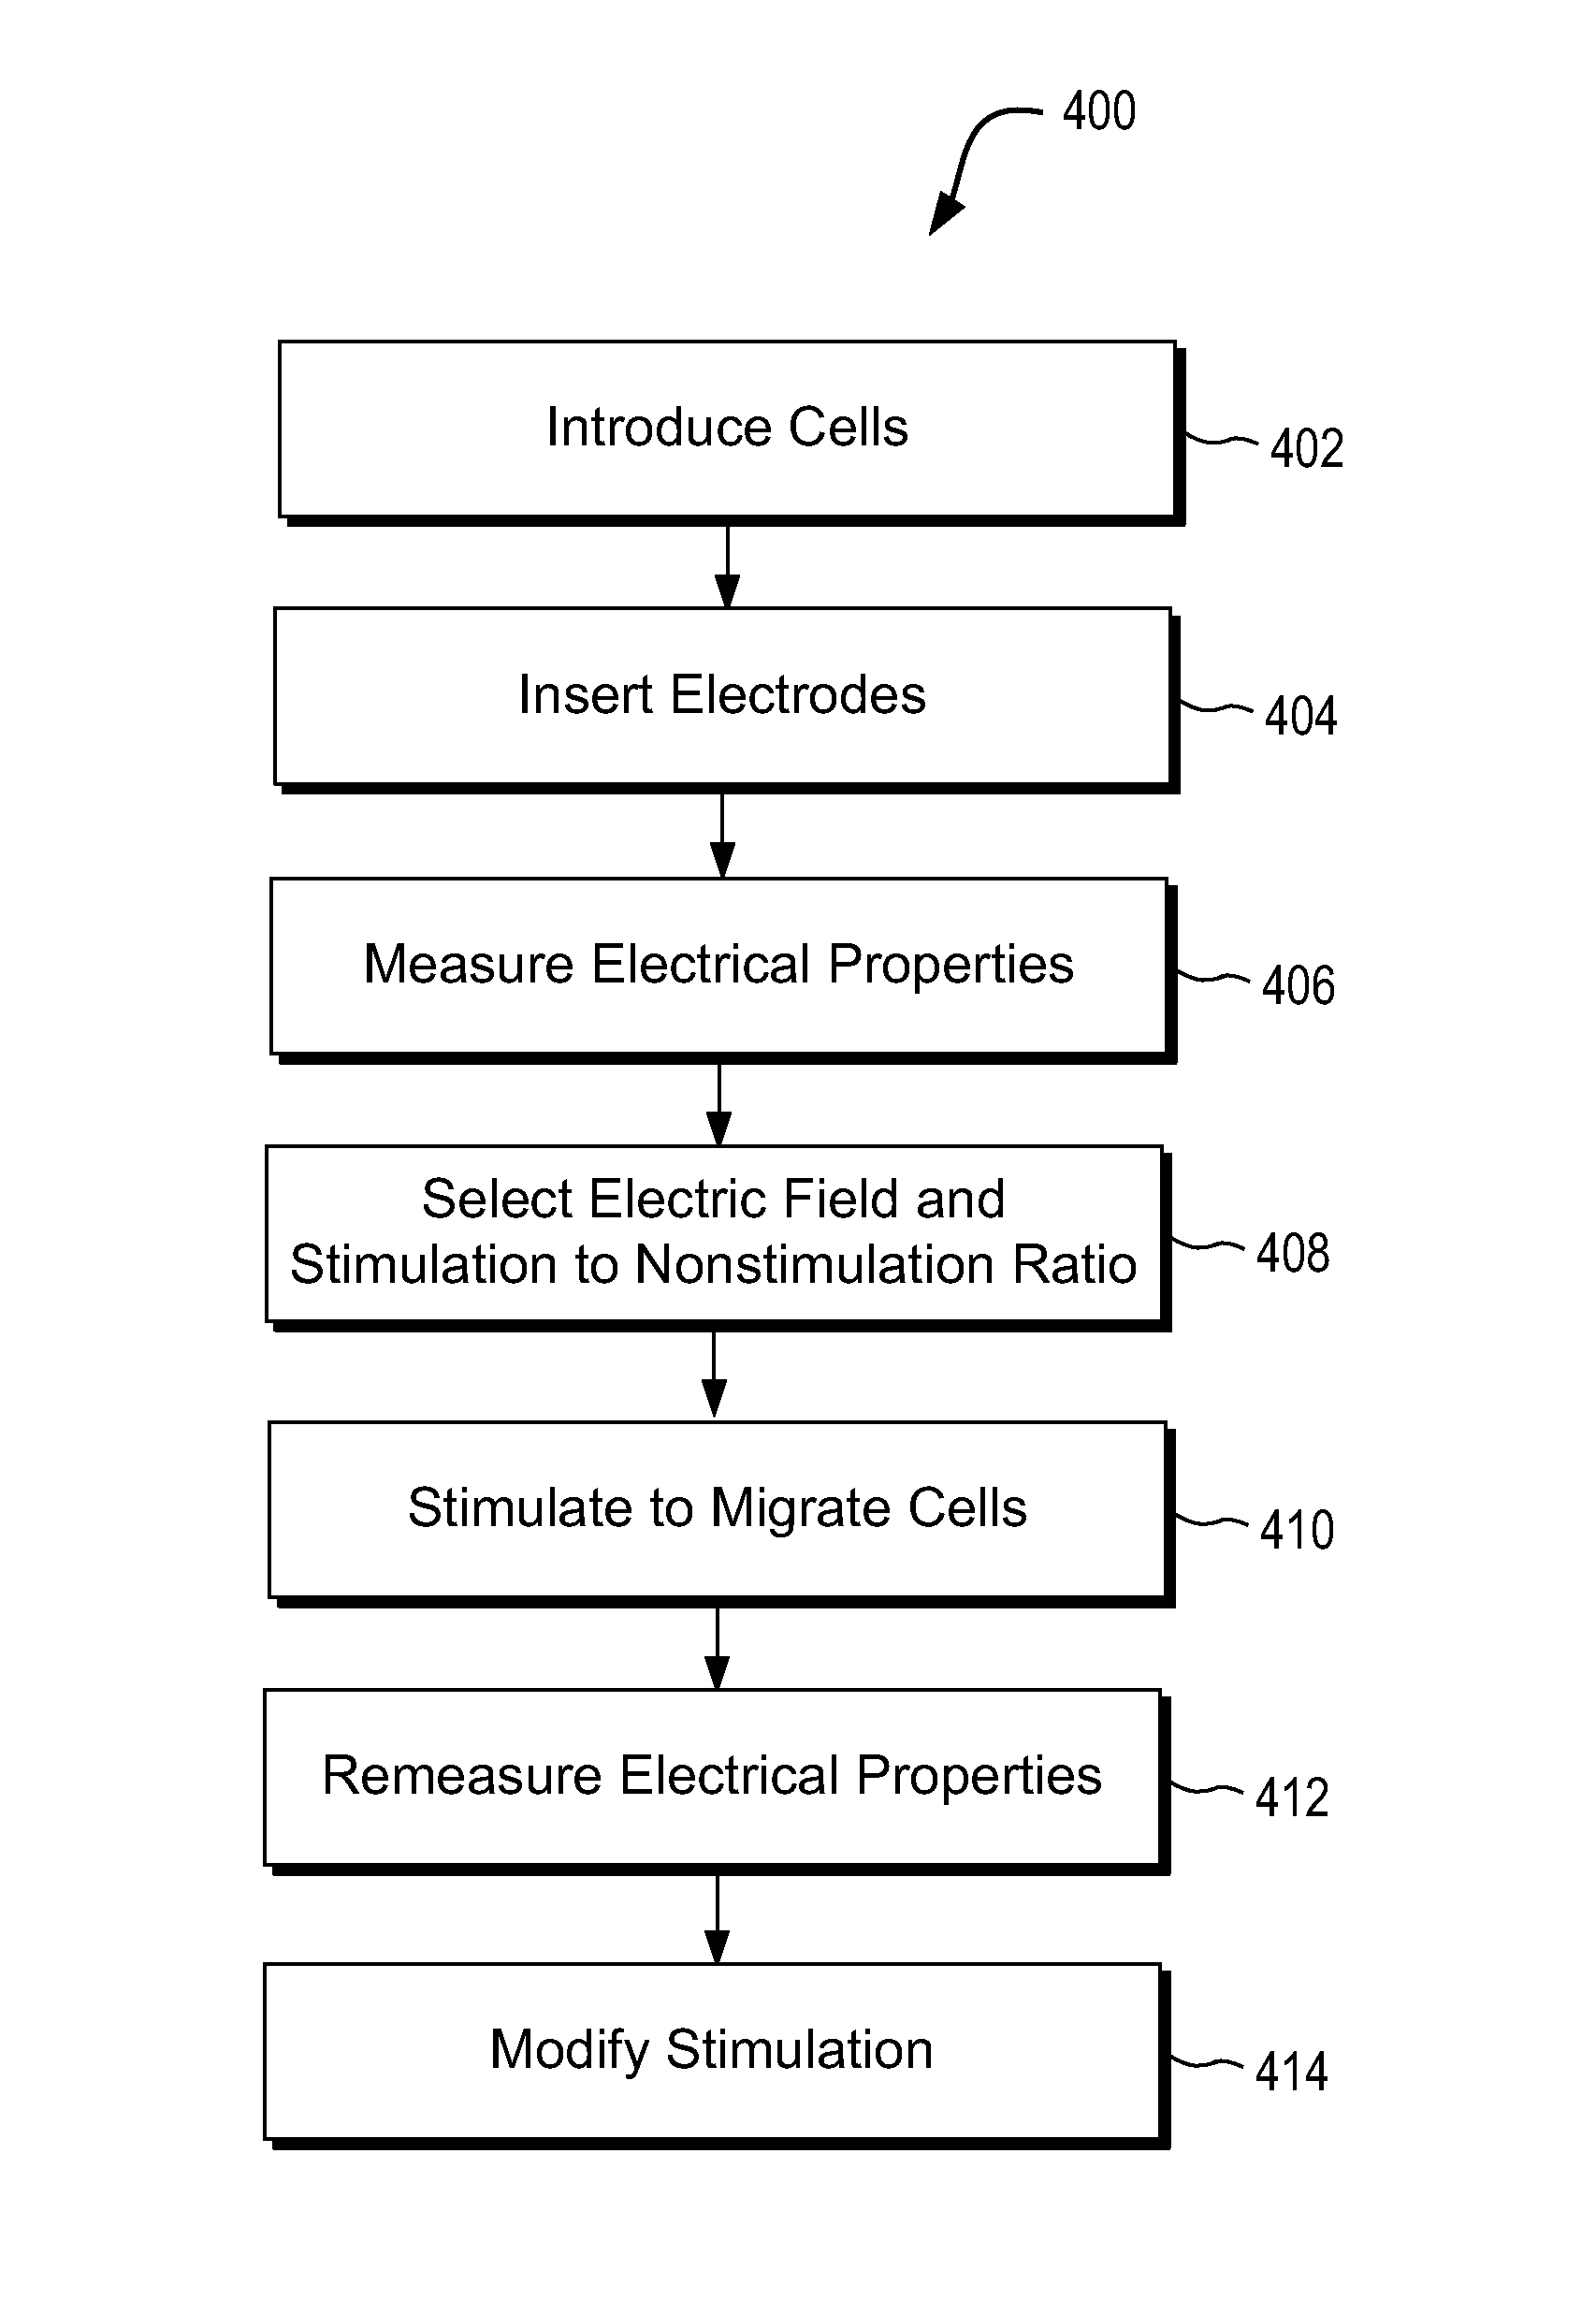 Systems and methods for selectively migrating cells using electric fields